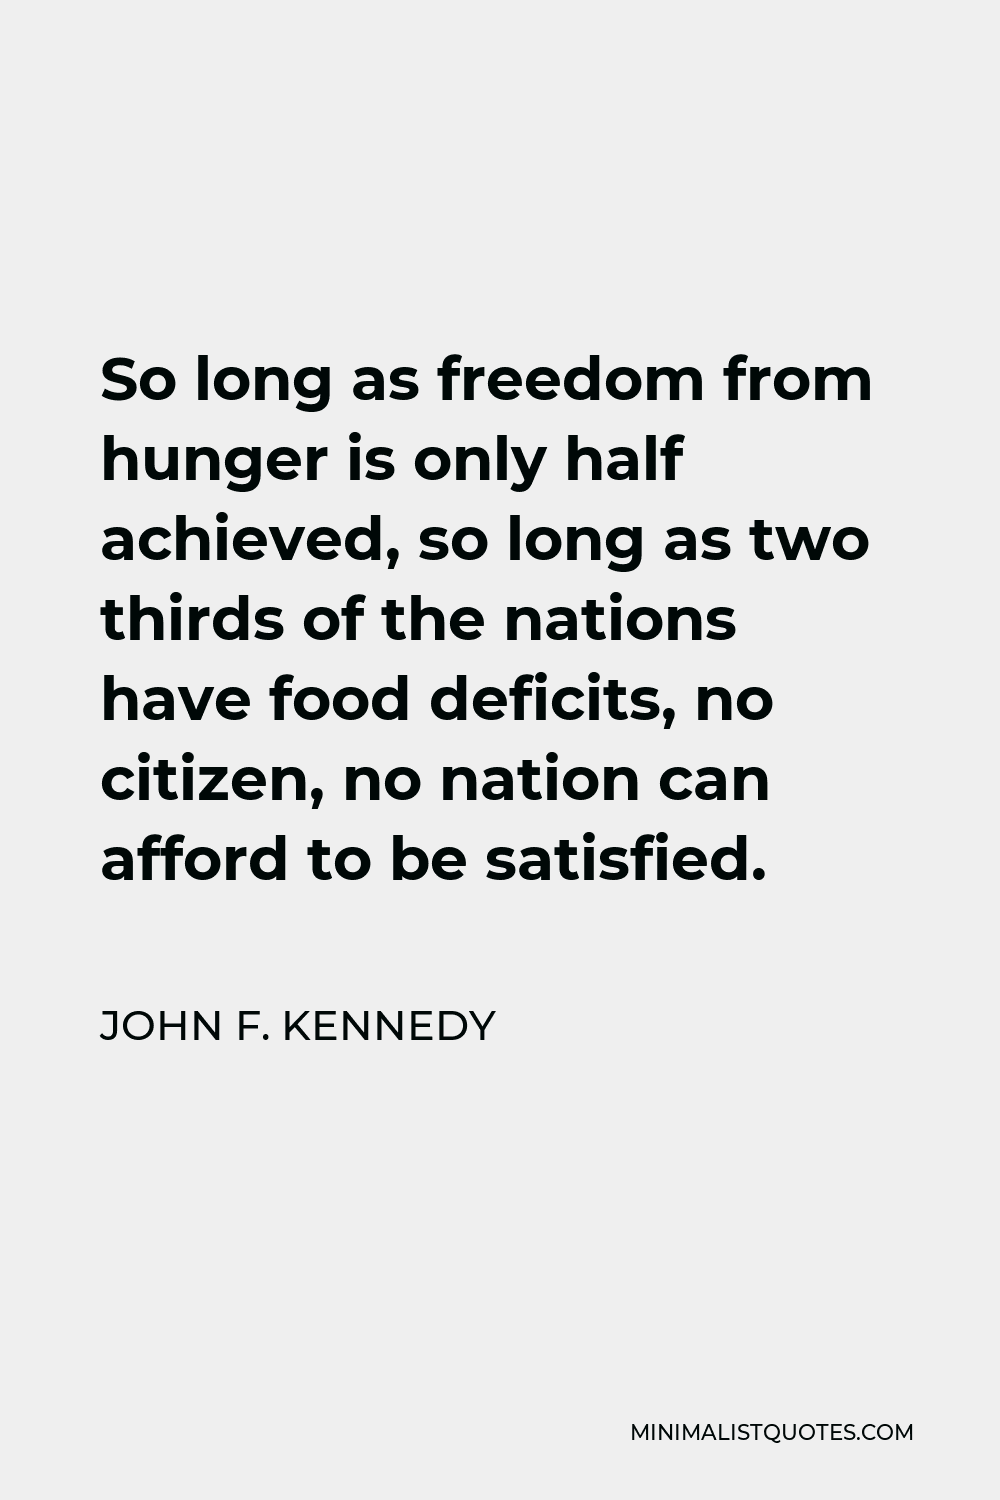 John F. Kennedy Quote - So long as freedom from hunger is only half achieved, so long as two thirds of the nations have food deficits, no citizen, no nation can afford to be satisfied.